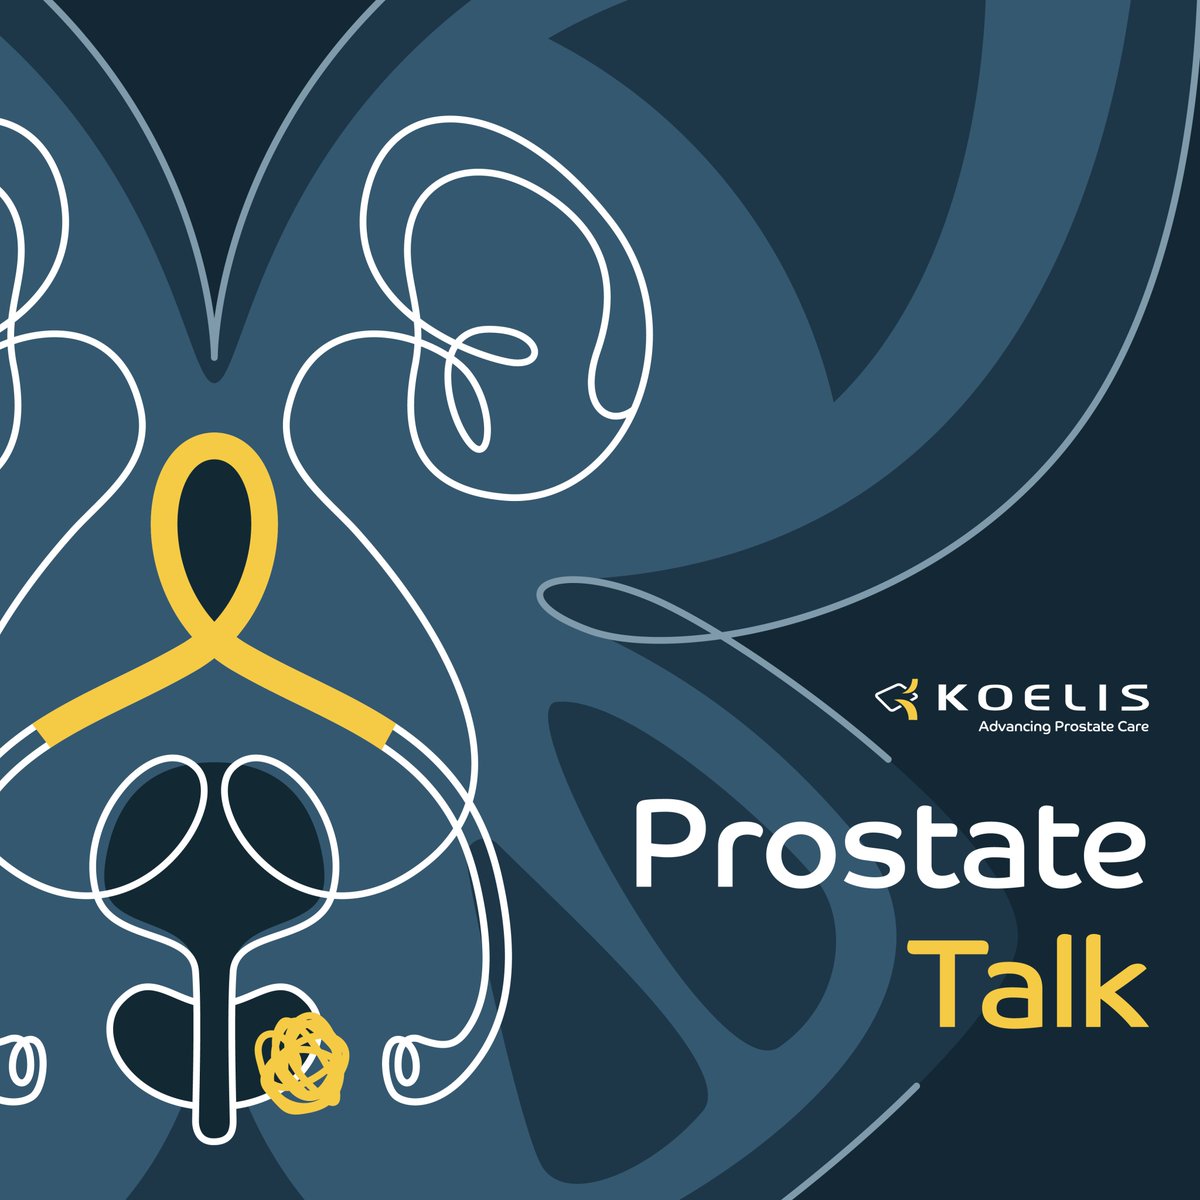 🚀 Thrilled to launch our new podcast, 'Prostate Talk'! 
Join us as we discuss the latest news in #prostatecare with top urologists. 🎧
Our first episode features Dr. @AnractJulien discussing #transperinealbiopsy for #prostatecancer.

Subscribe now! podcast.ausha.co/prostate-talk